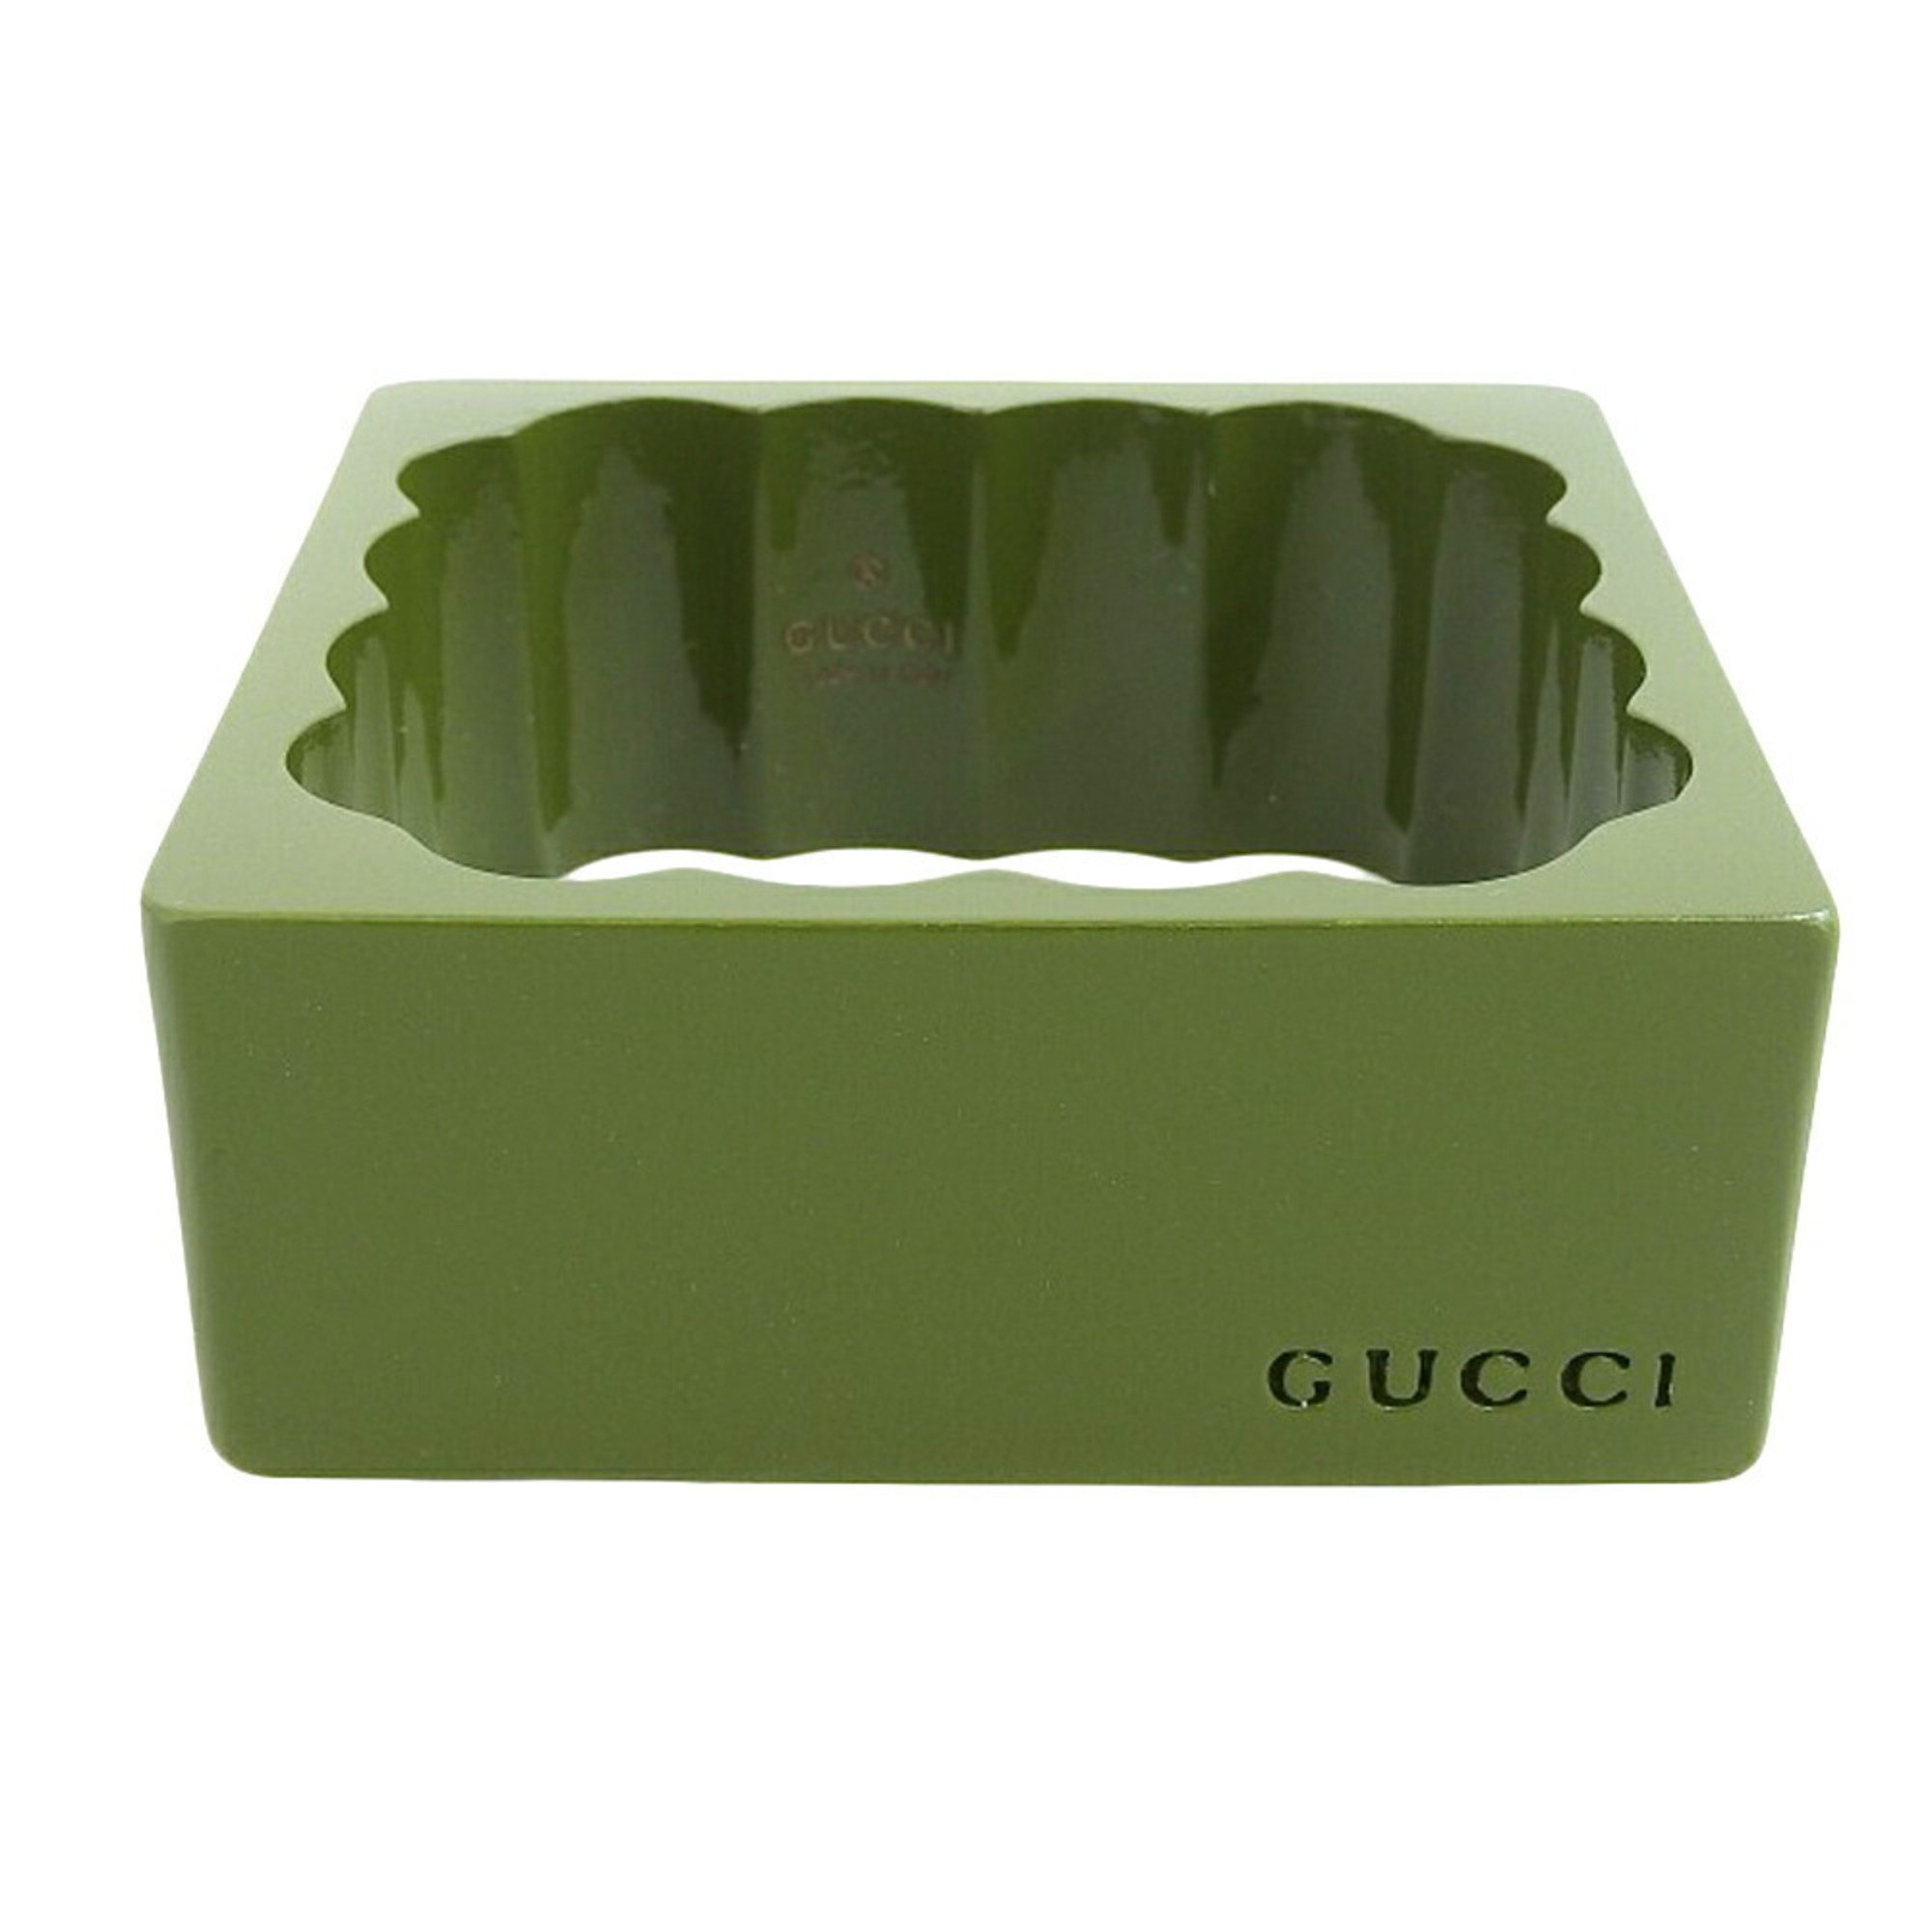 Gucci GUCCI bangle olive green M size □V carved seal